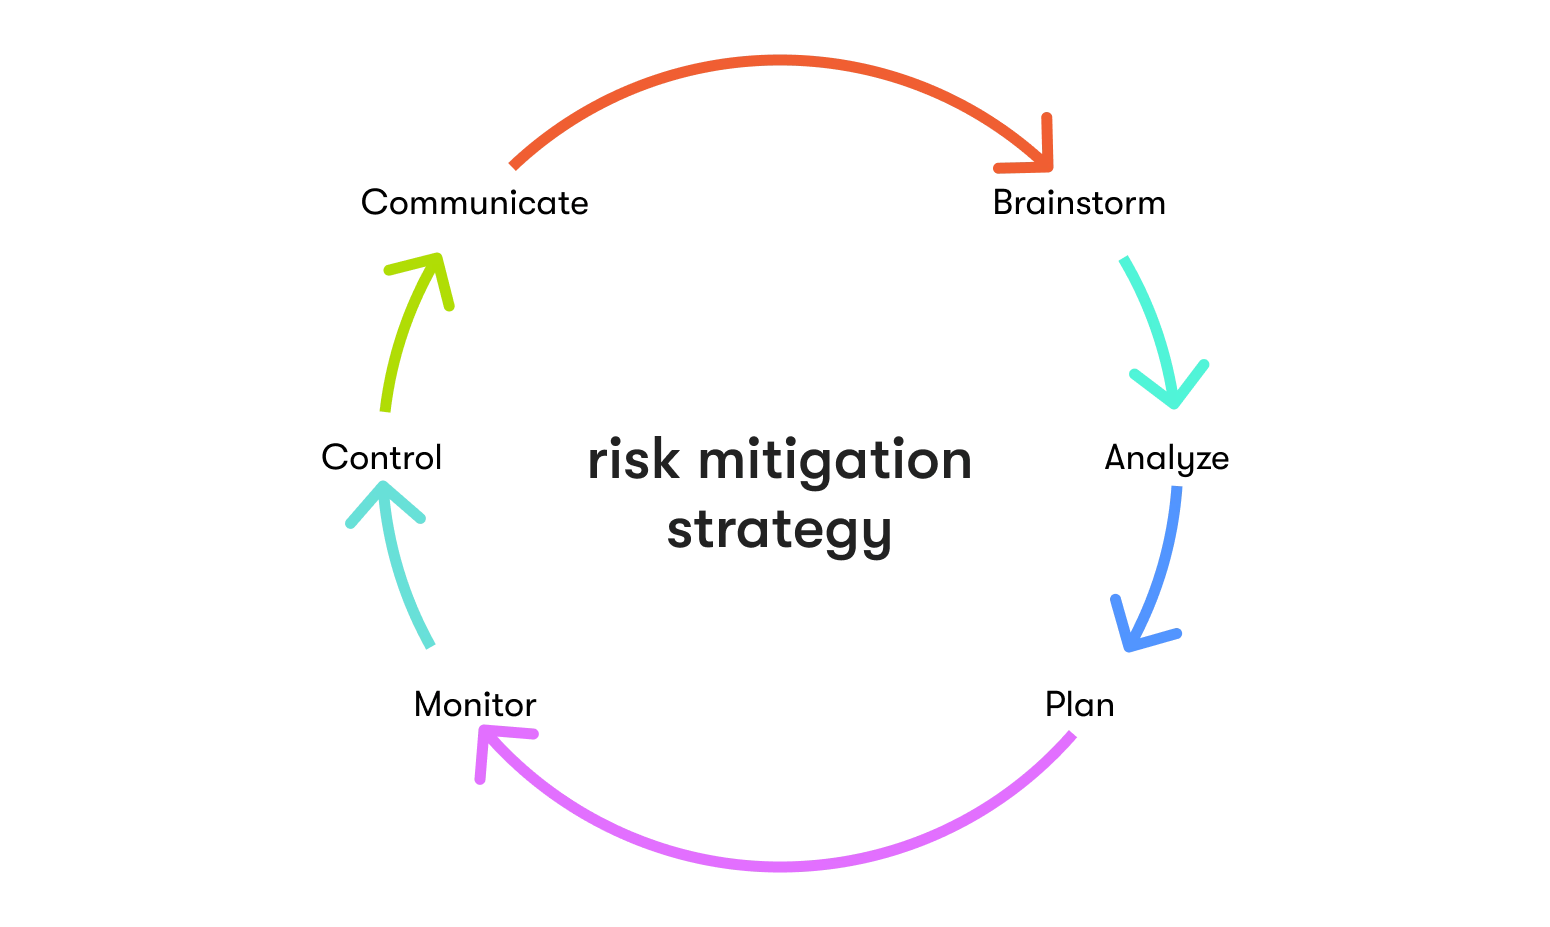 how to measure outcomes of a project considering risk mitigation strategies